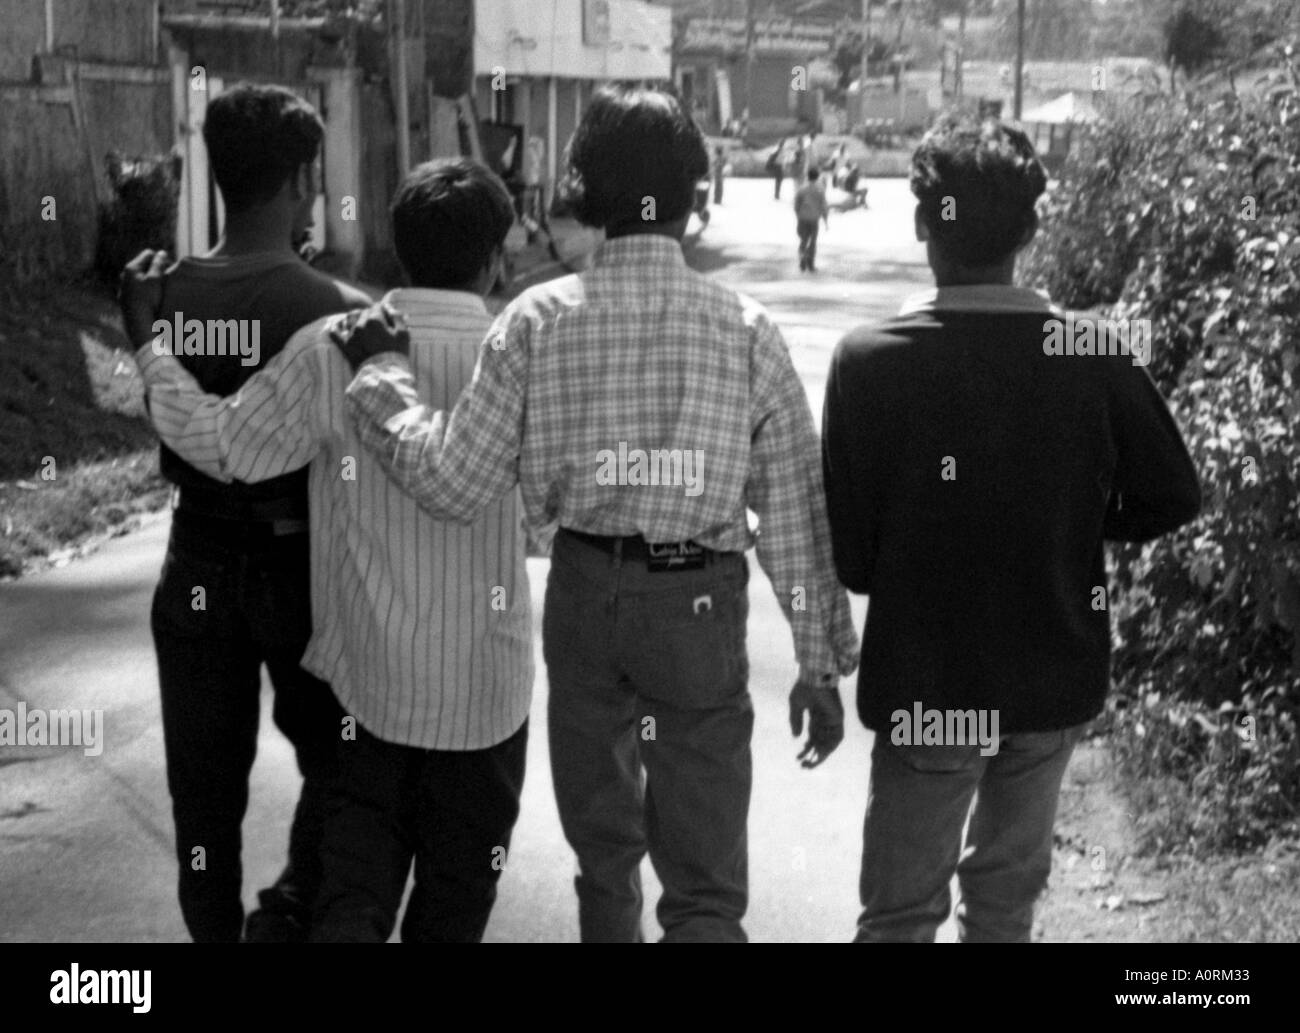 south asia ) (people together unity) Black and White Stock Photos & Images  - Alamy